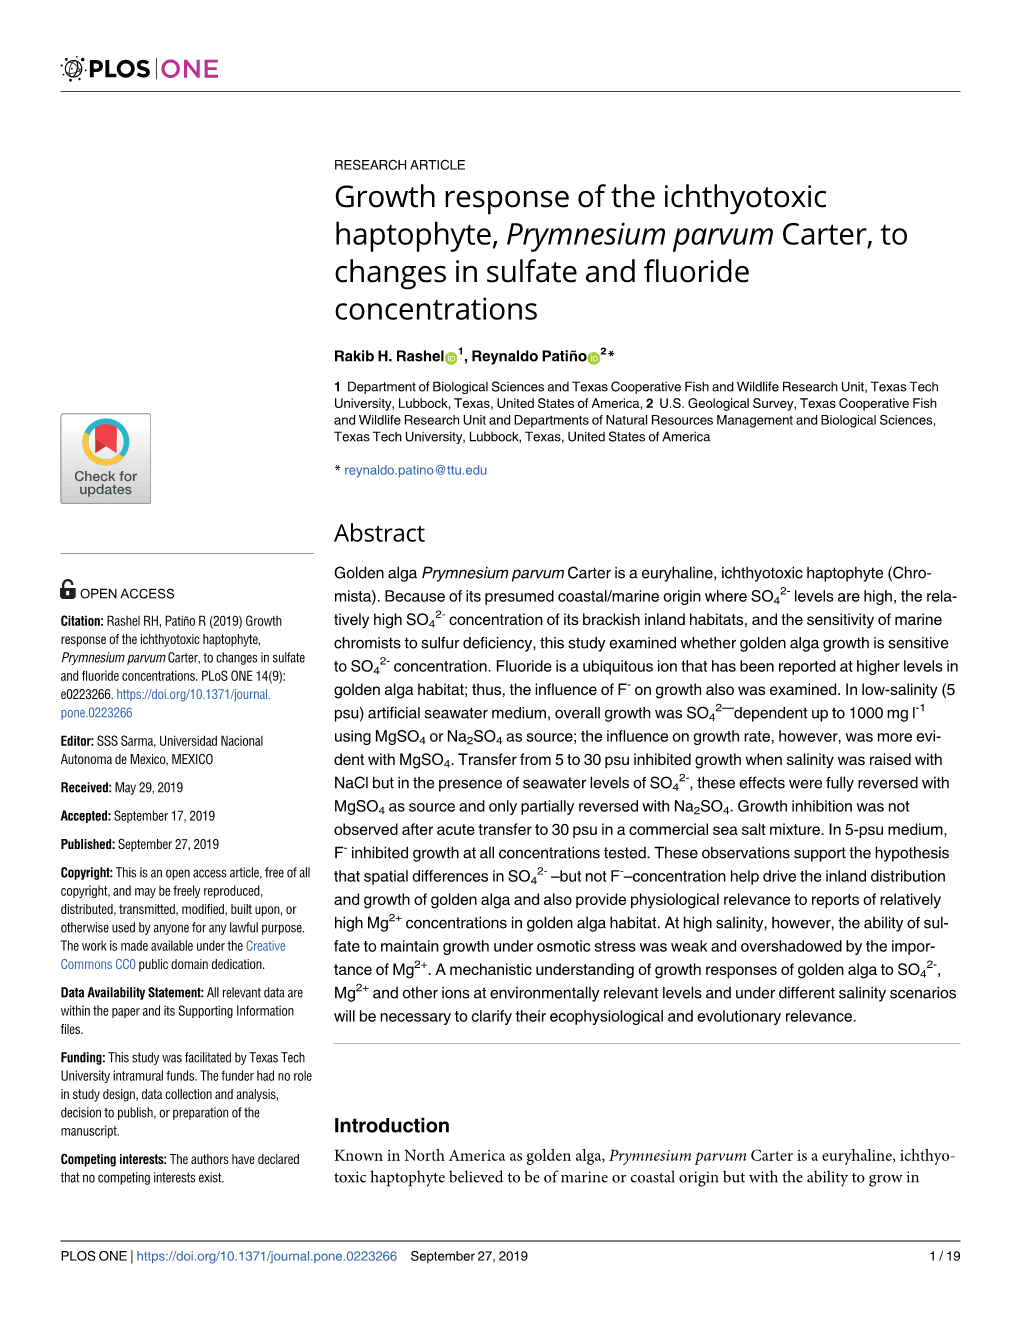 Growth Response of the Ichthyotoxic Haptophyte, Prymnesium Parvum Carter, to Changes in Sulfate and Fluoride Concentrations